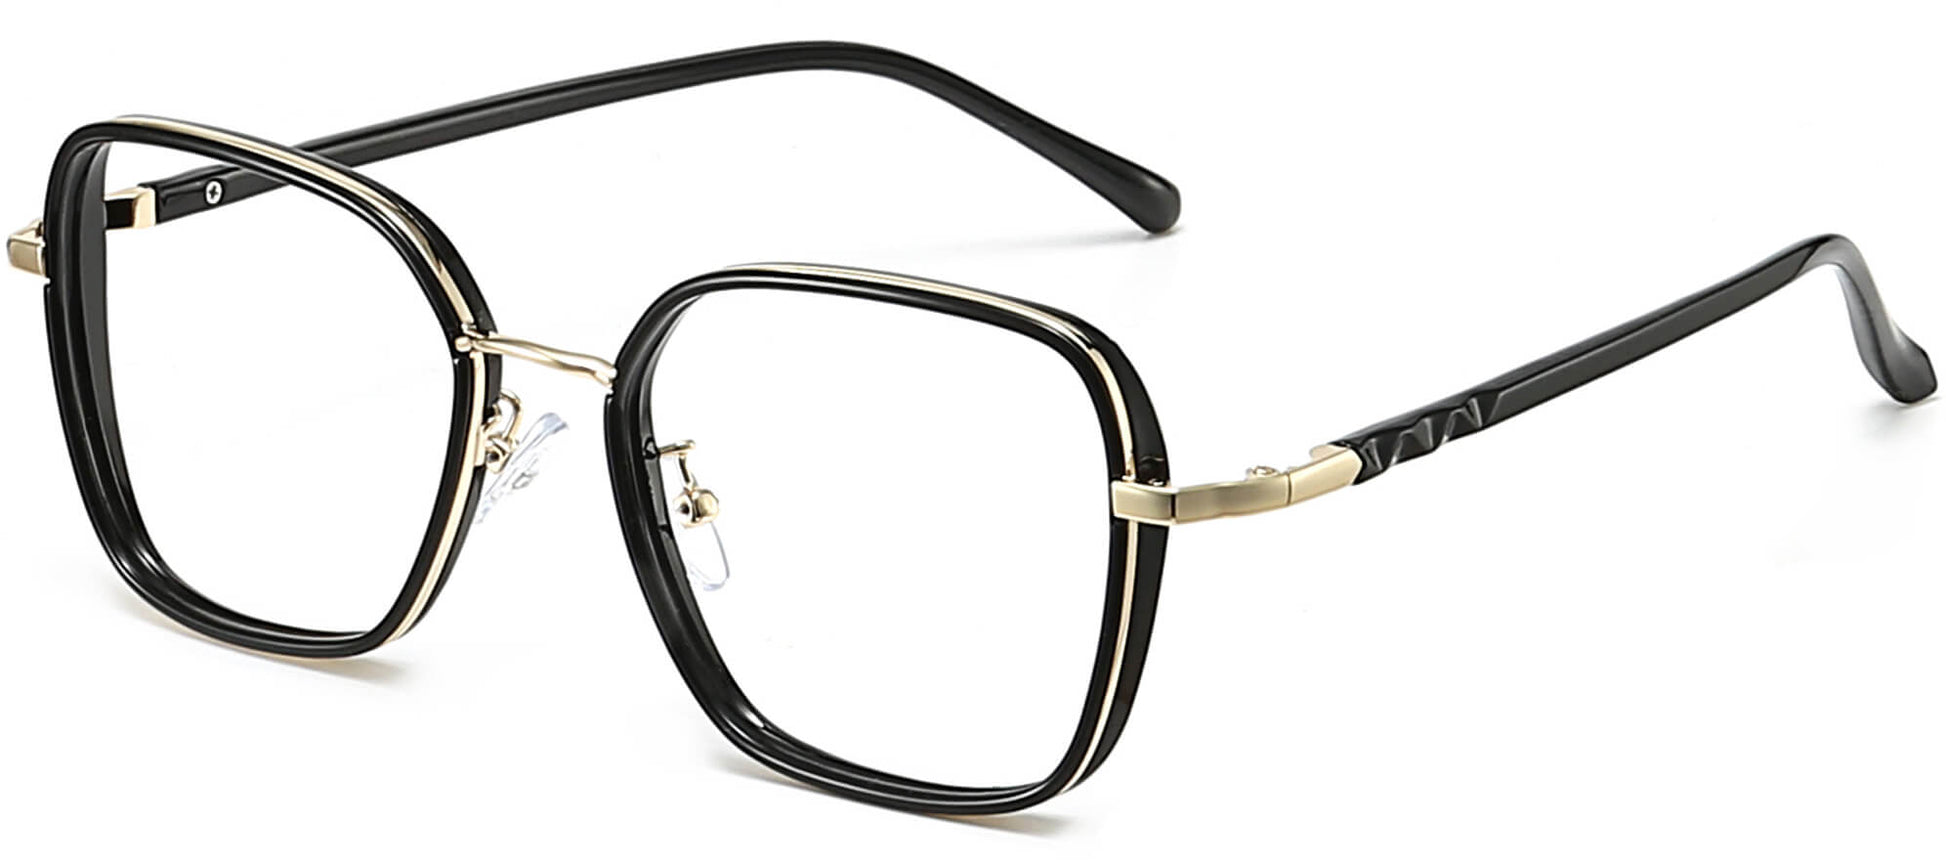 Odin Square Black Tortoise Eyeglasses from ANRRI, angle view